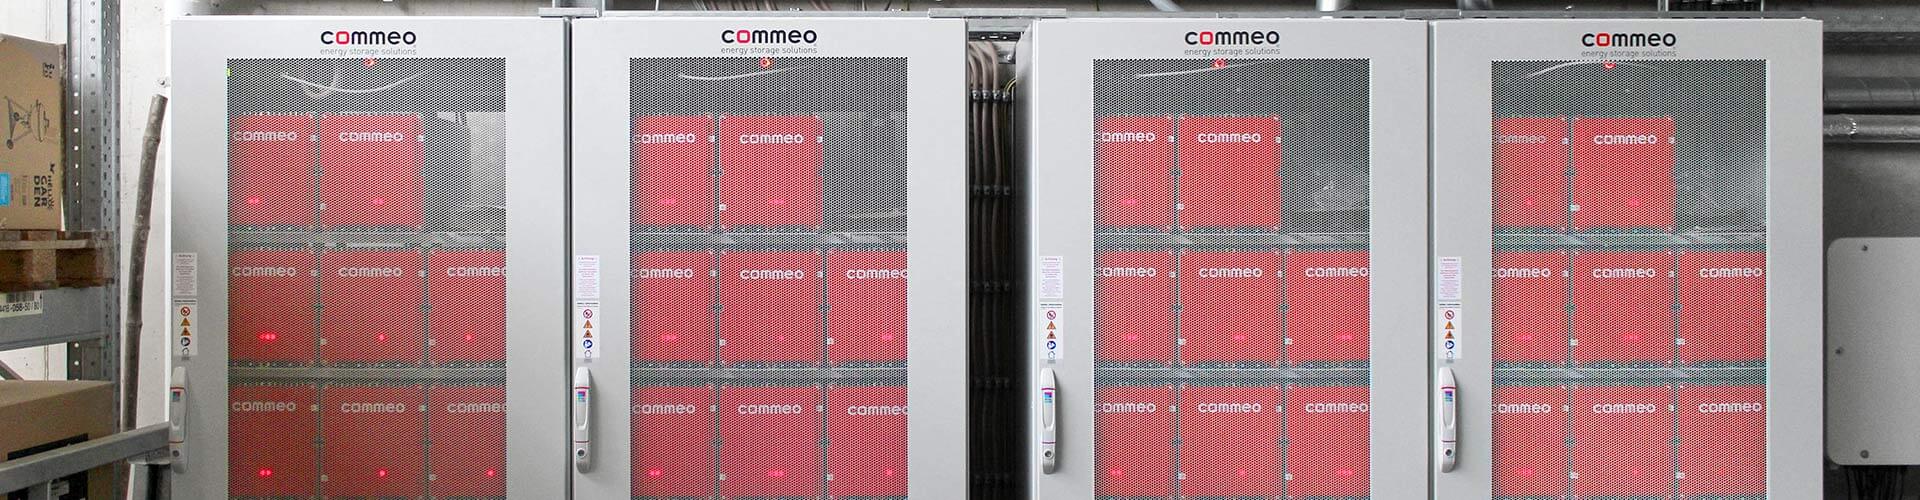 The picture shows four battery storage systems from Commeo in the Ostmann garden center.